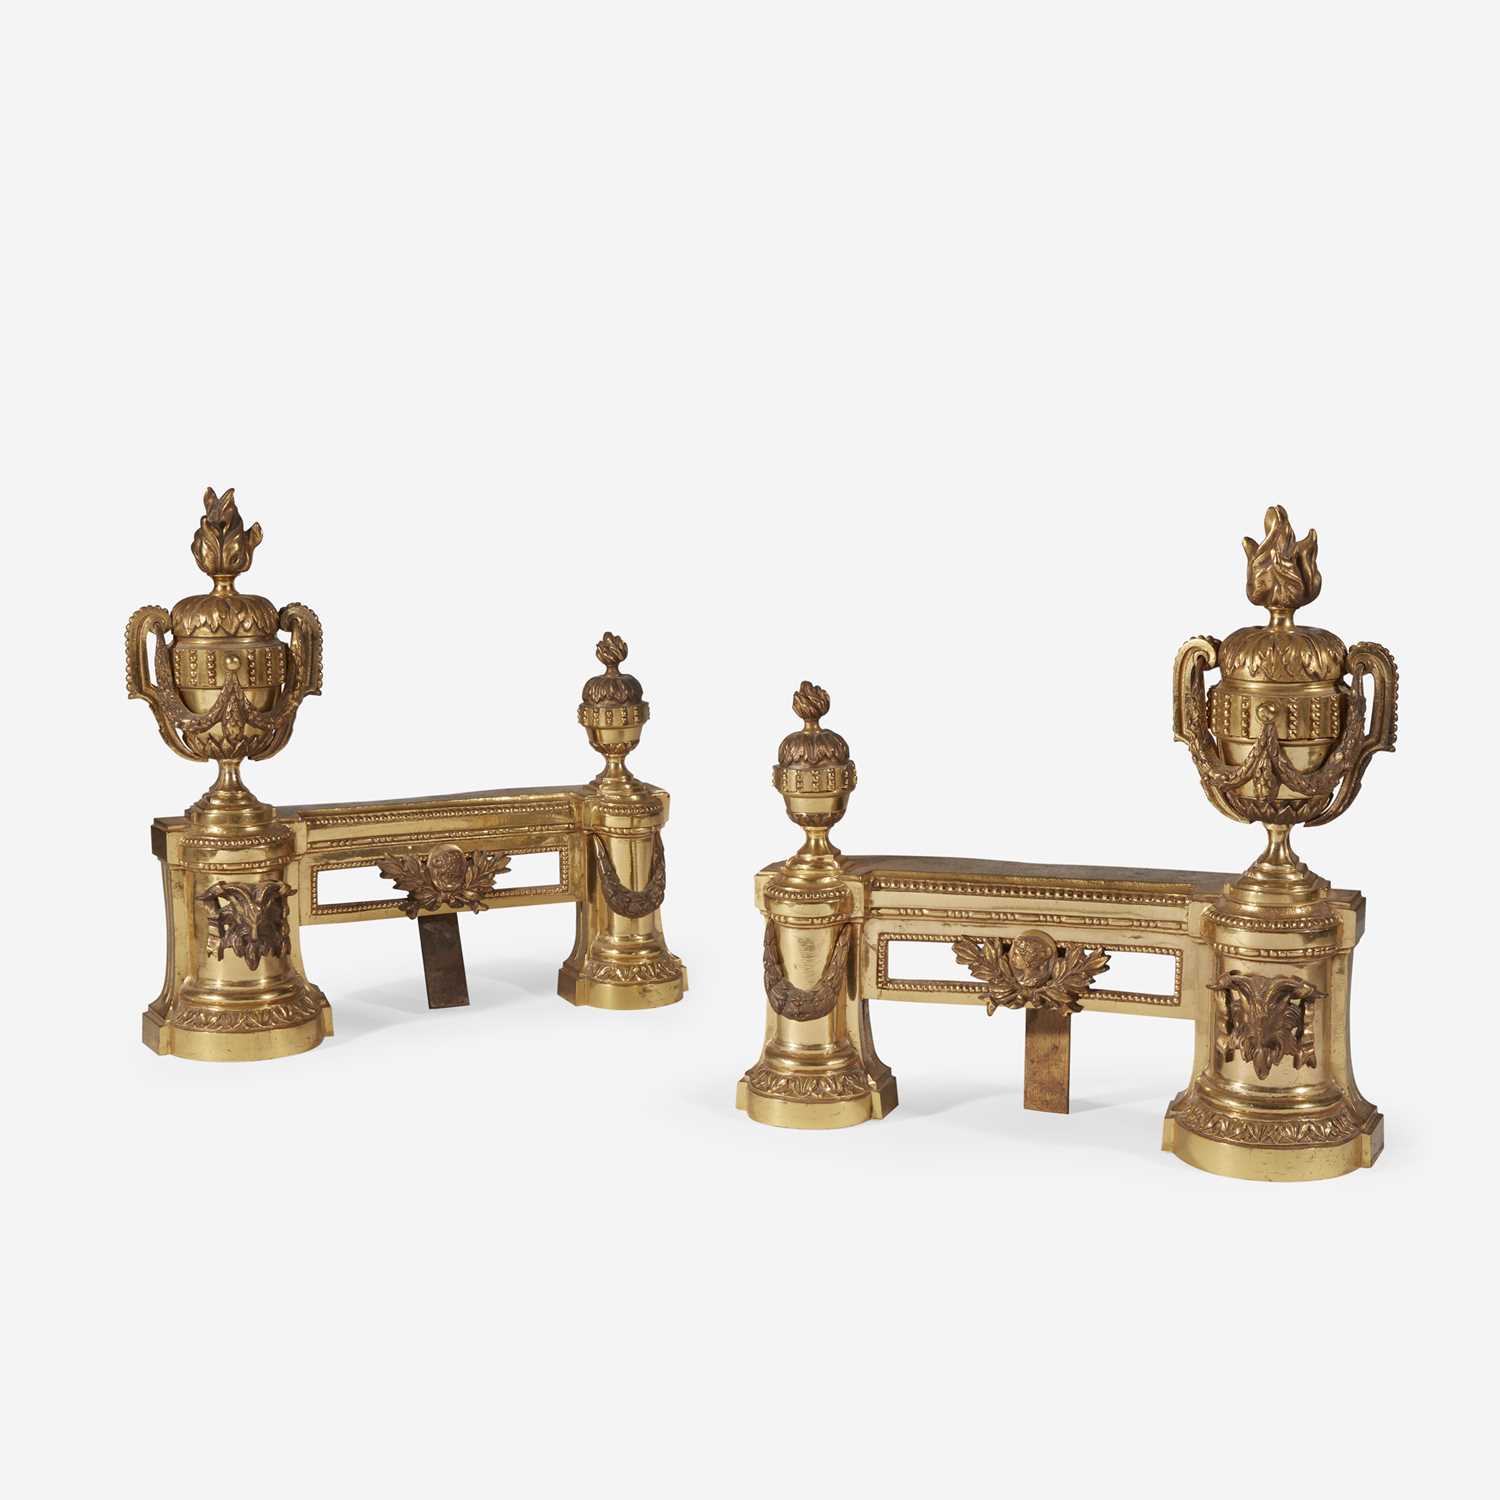 Lot 34 - A Pair of Louis XVI Style Gilt-Bronze Chenets